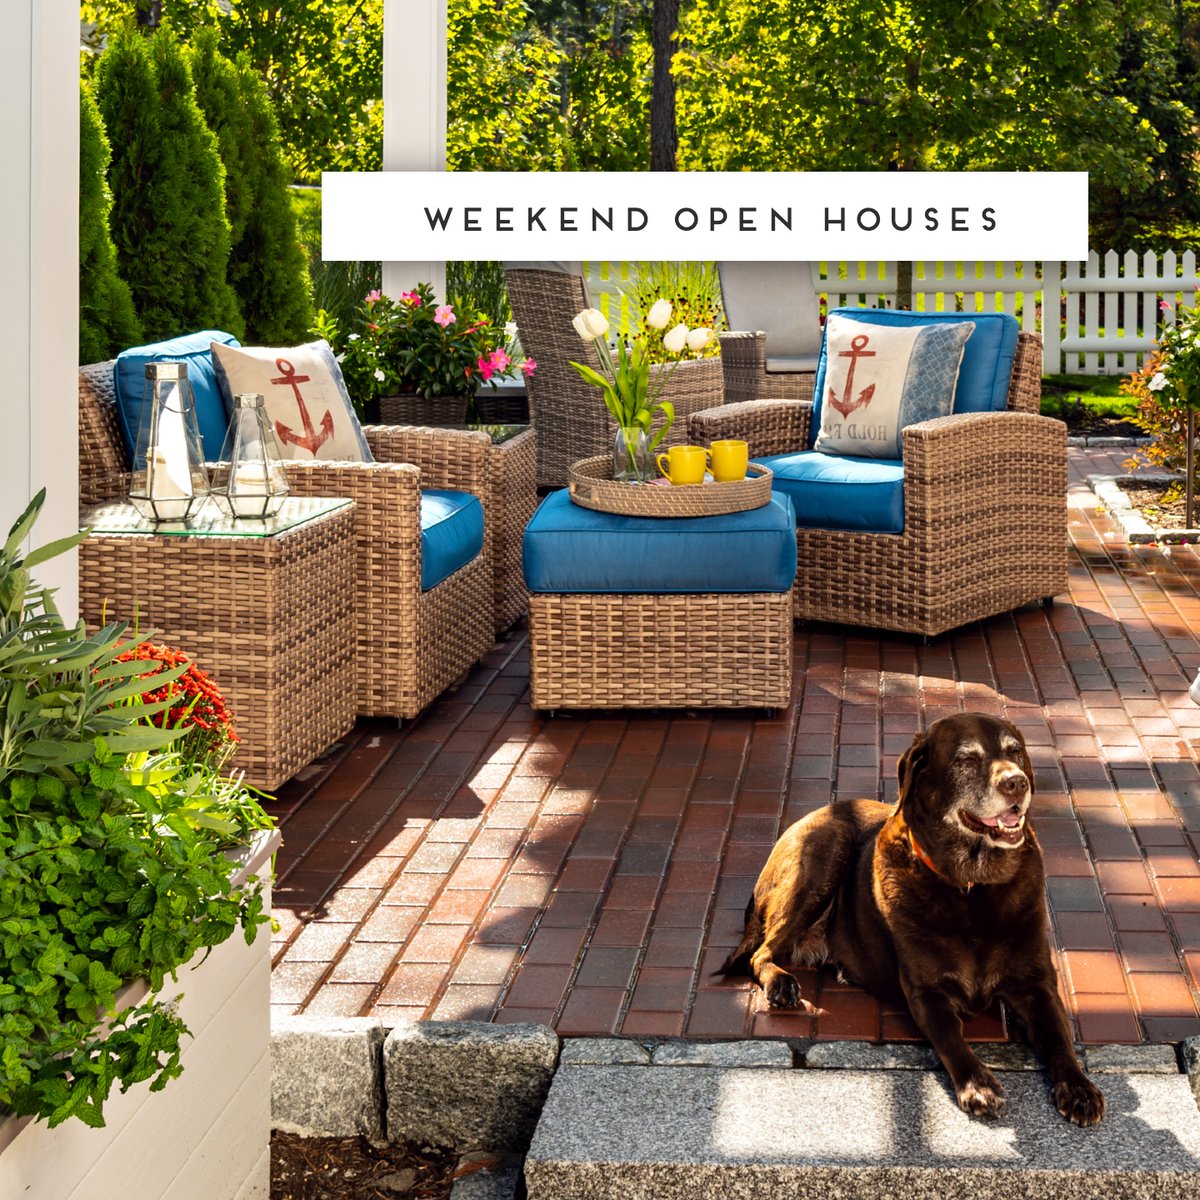 ✨4.26.24 ☆ NINE ☆ Weekend Open Houses at The Pinehills, Plymouth, MA. hubs.ly/Q02v7Y3W0 | 508.209.2000 | Start your visit at the Summerhouse, 33 Summerhouse Drive, Plymouth, MA.